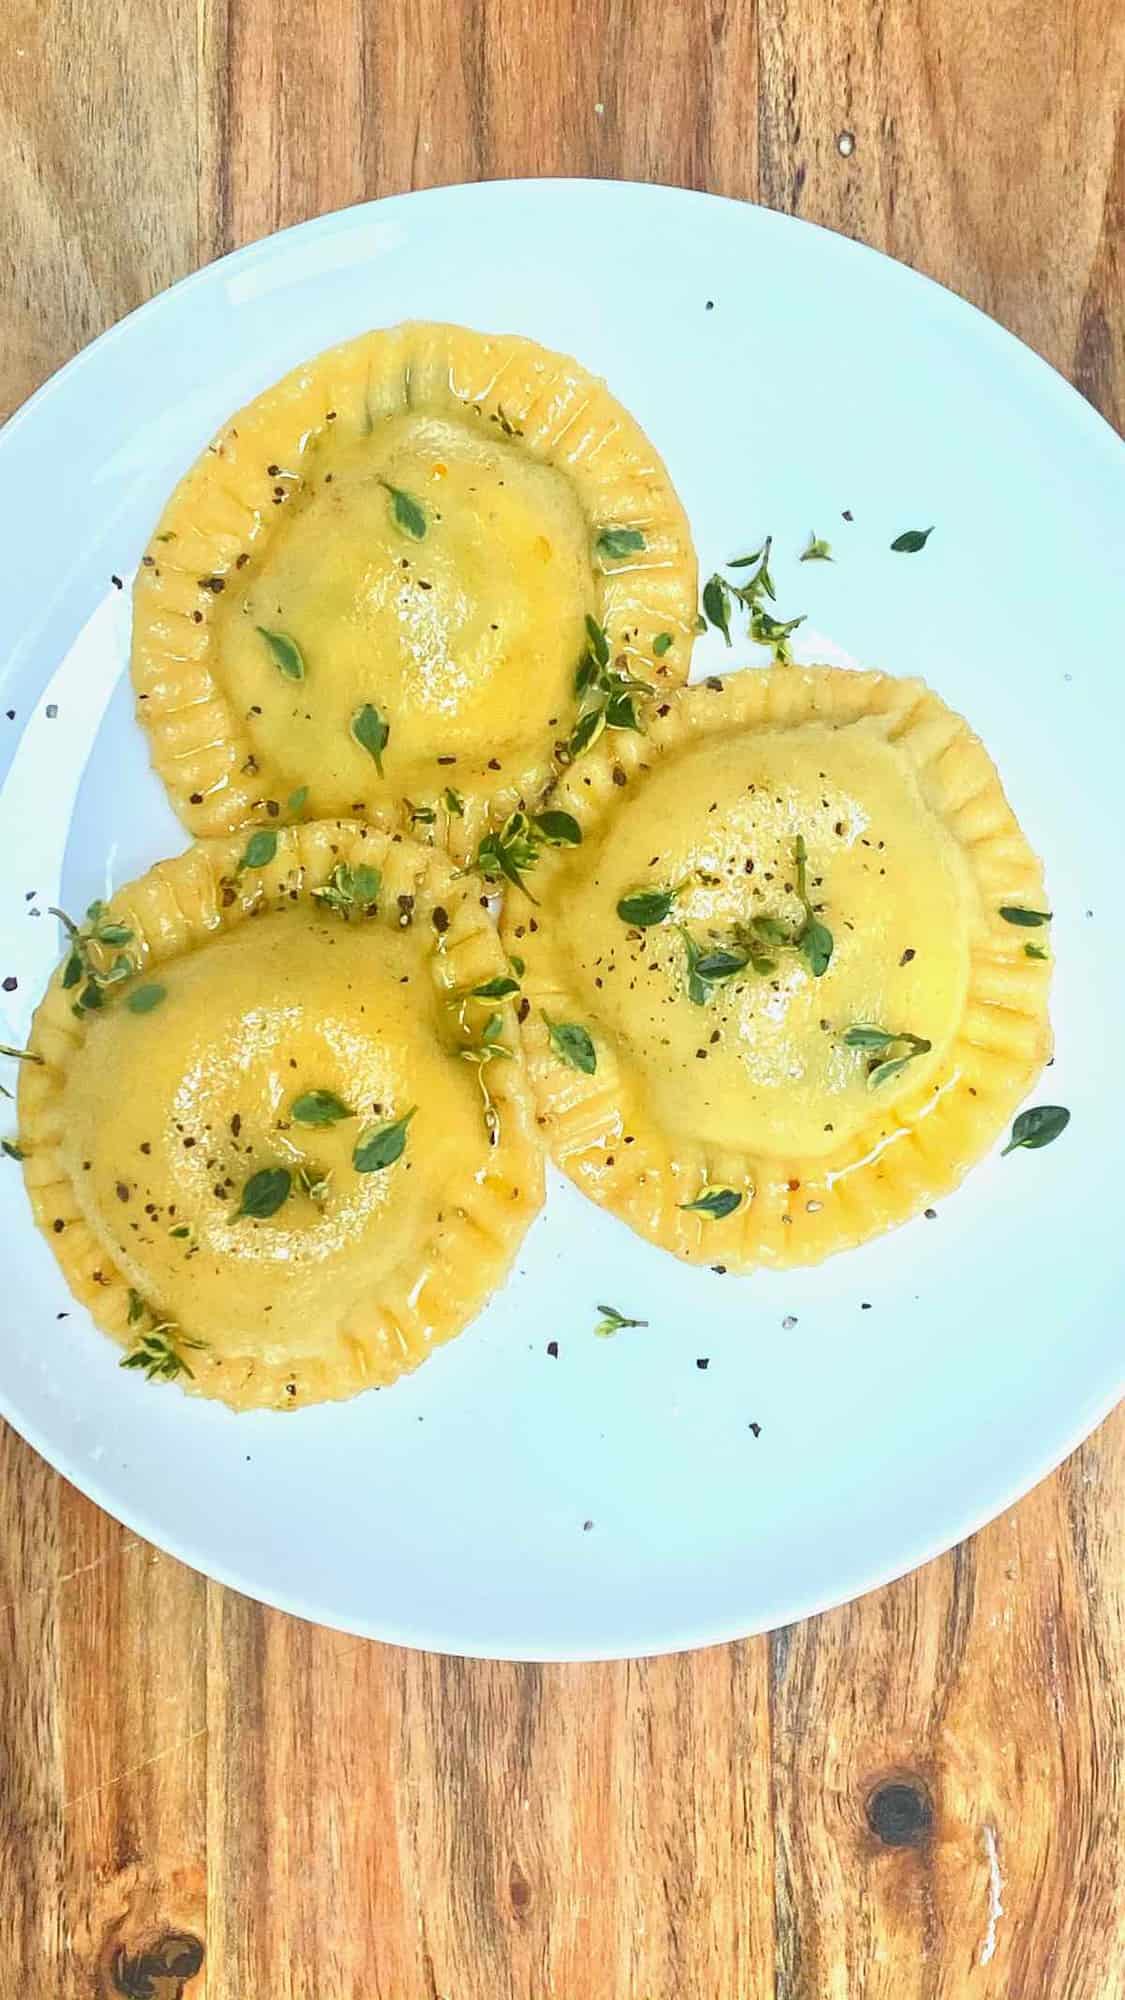 Three homemade ravioli with spinach filling in a plate